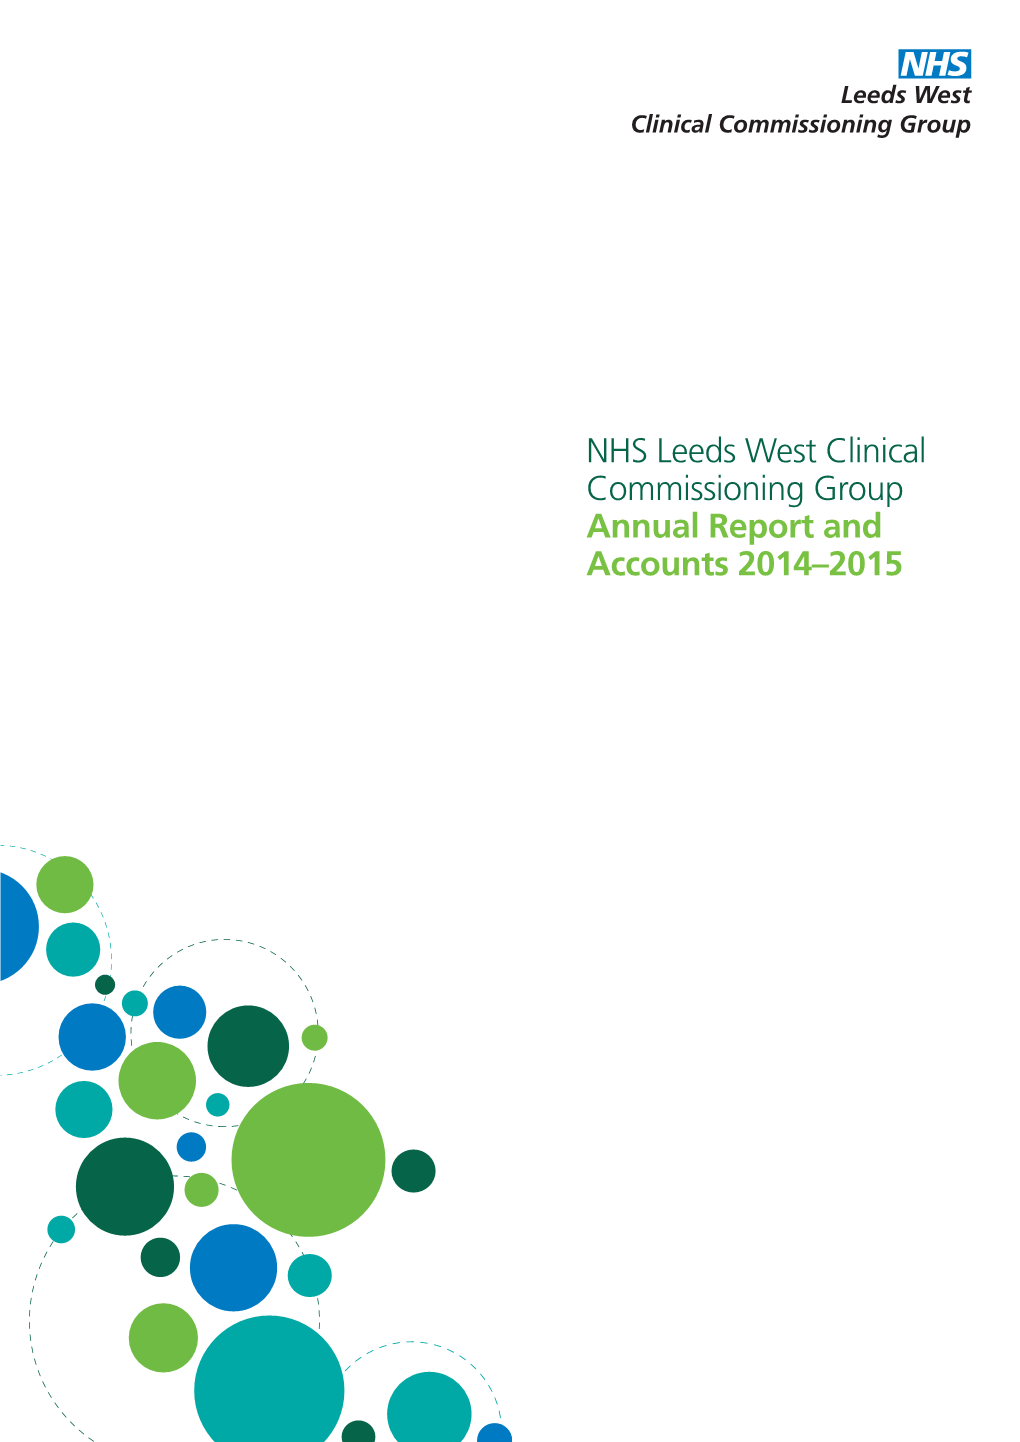 NHS Leeds West CCG: Annual Report and Accounts 2014-15